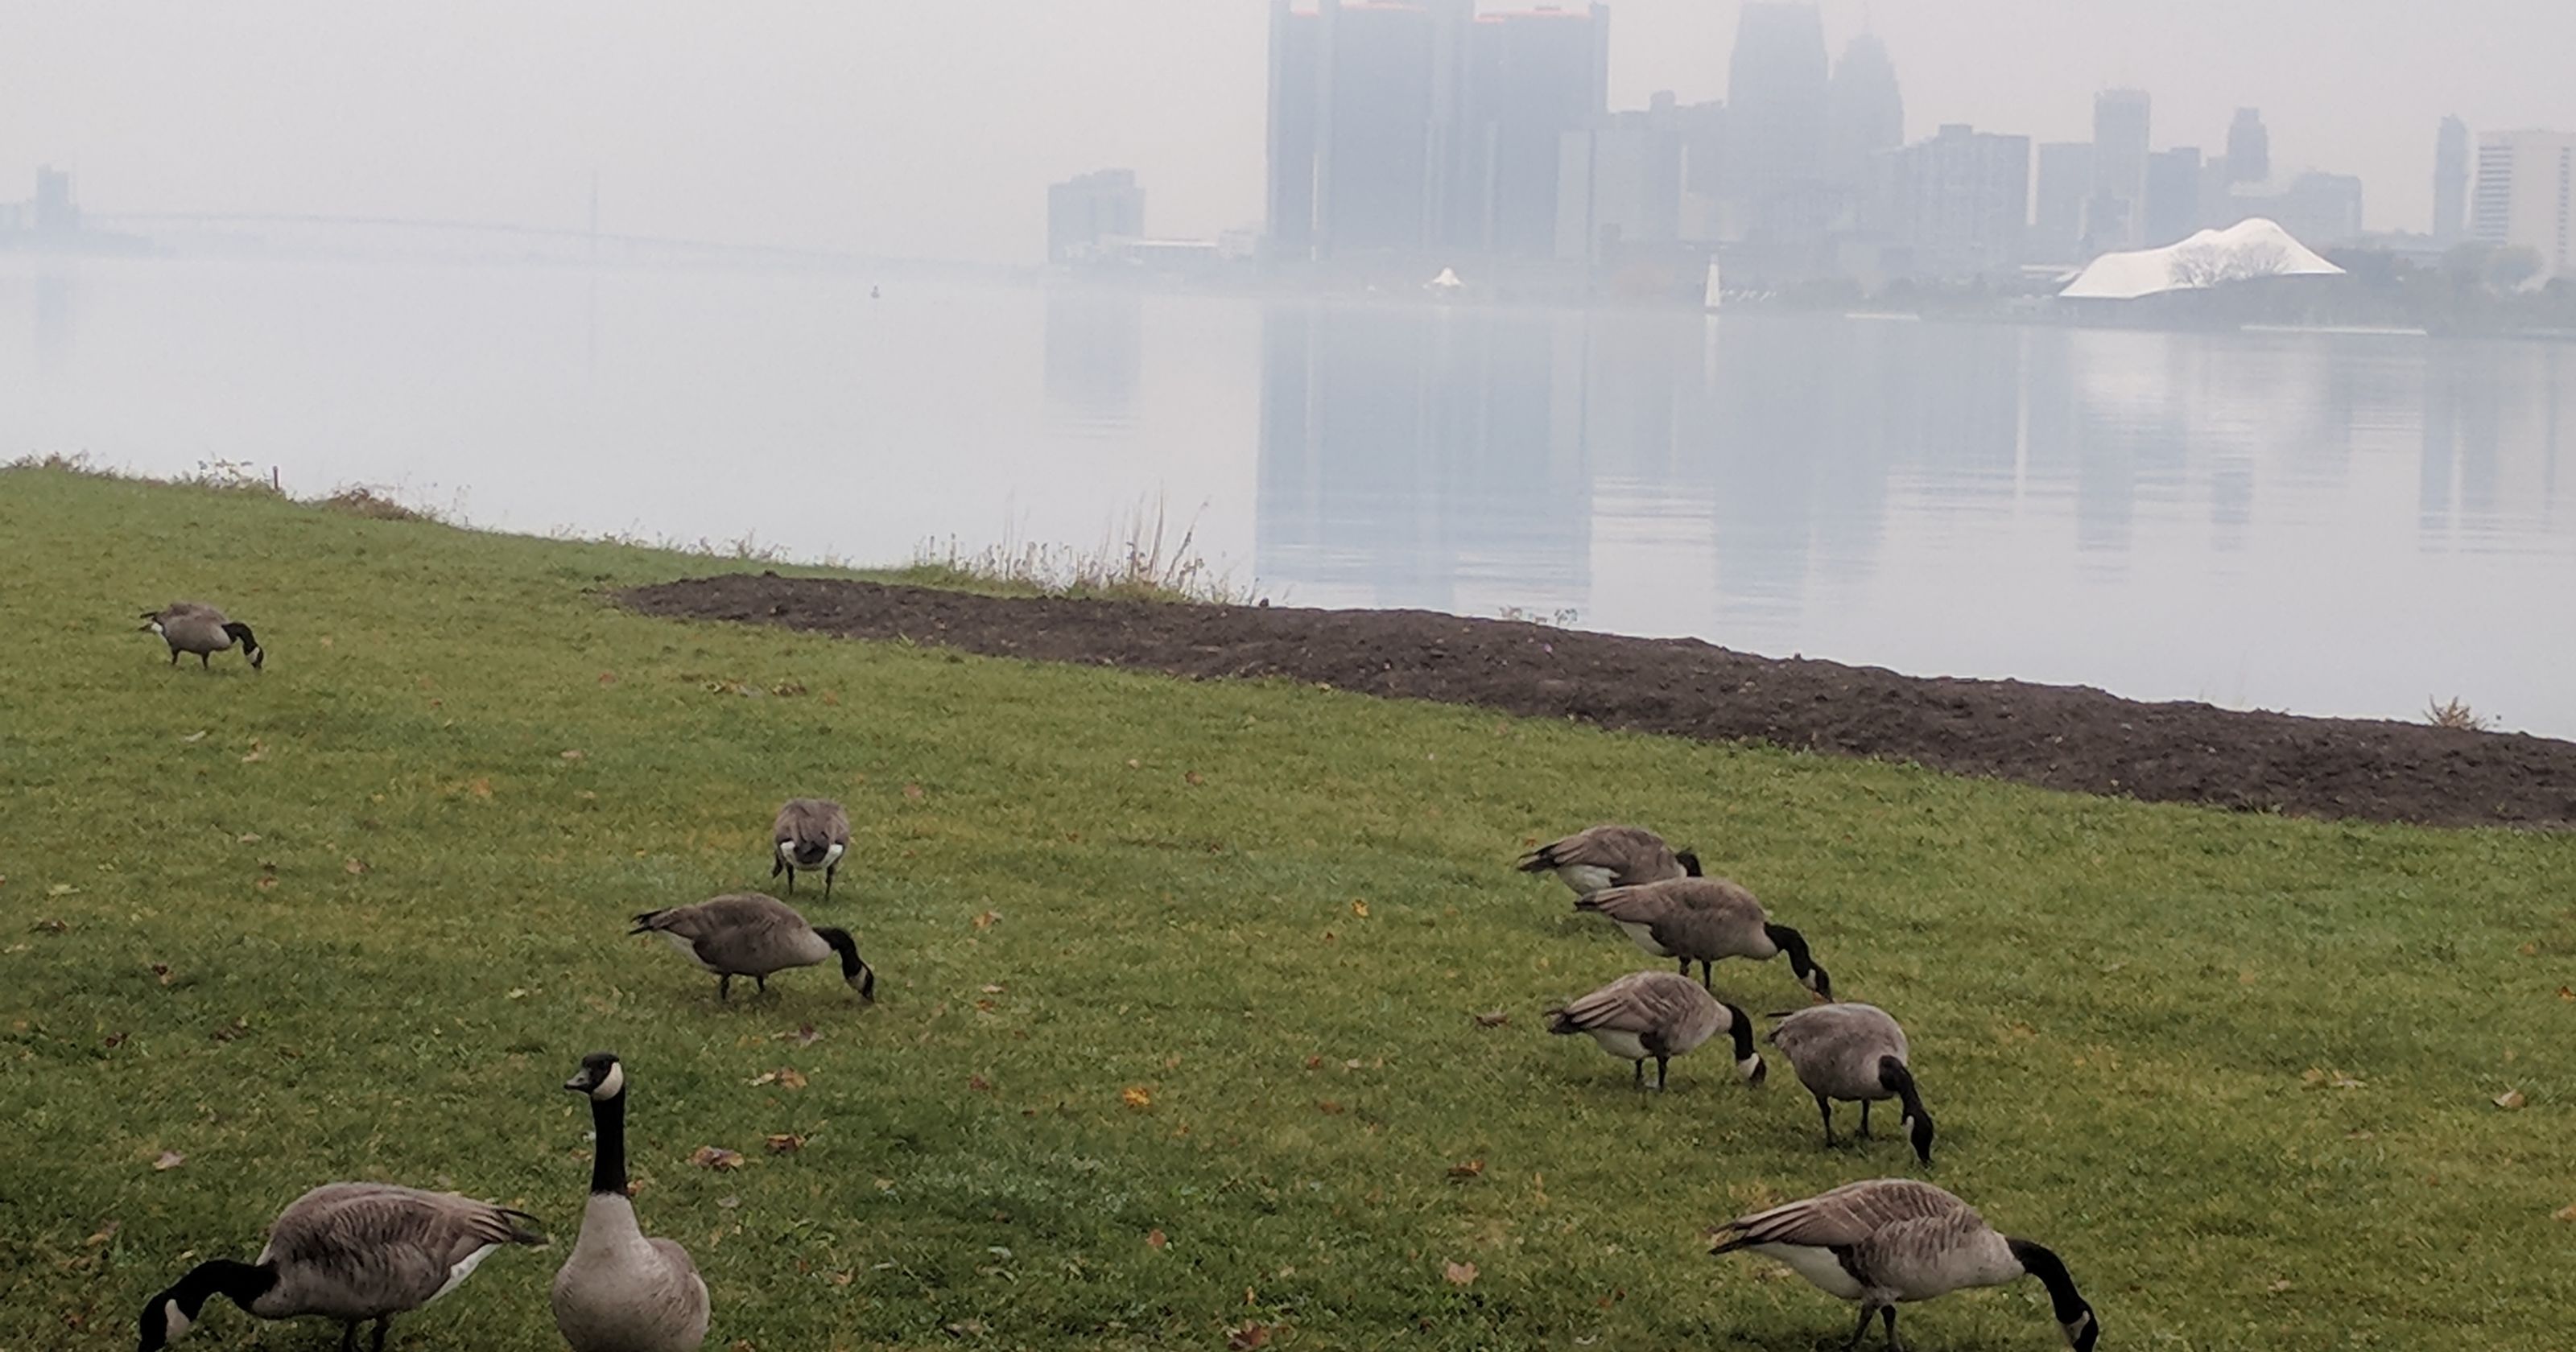 Canada geese give Michigan a migraine